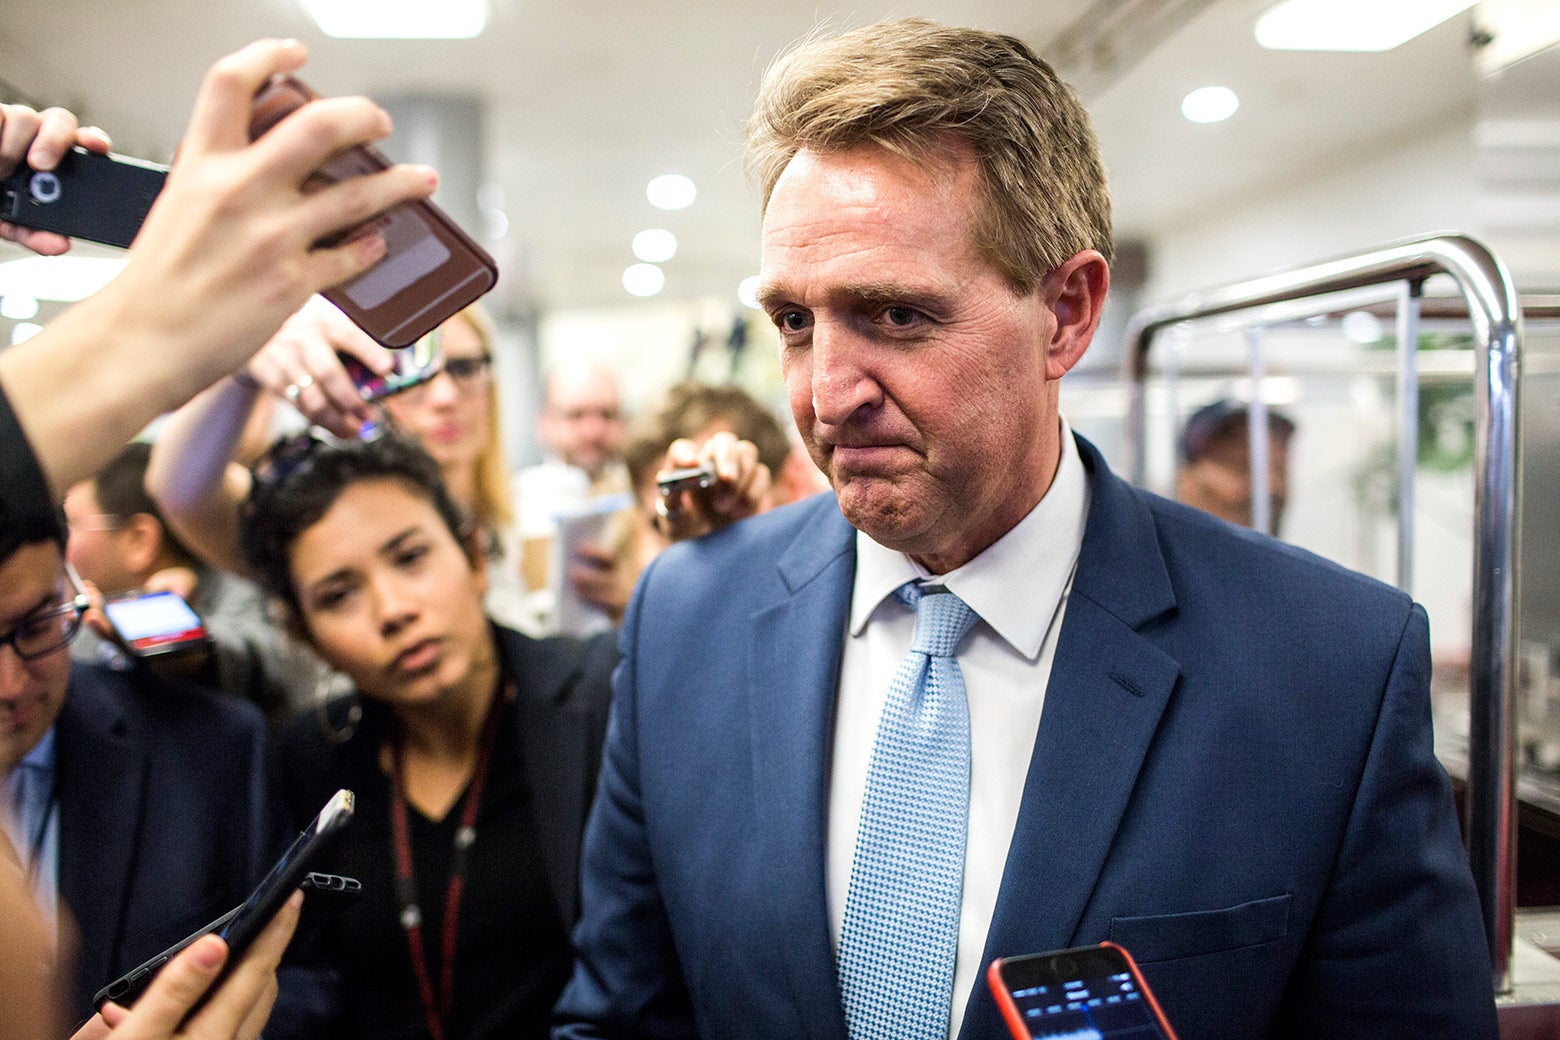 Sen. Jeff Flake (R-AZ) speaks to reporters following a vote on Capitol Hill on January 11, 2018 in Washington, DC. 